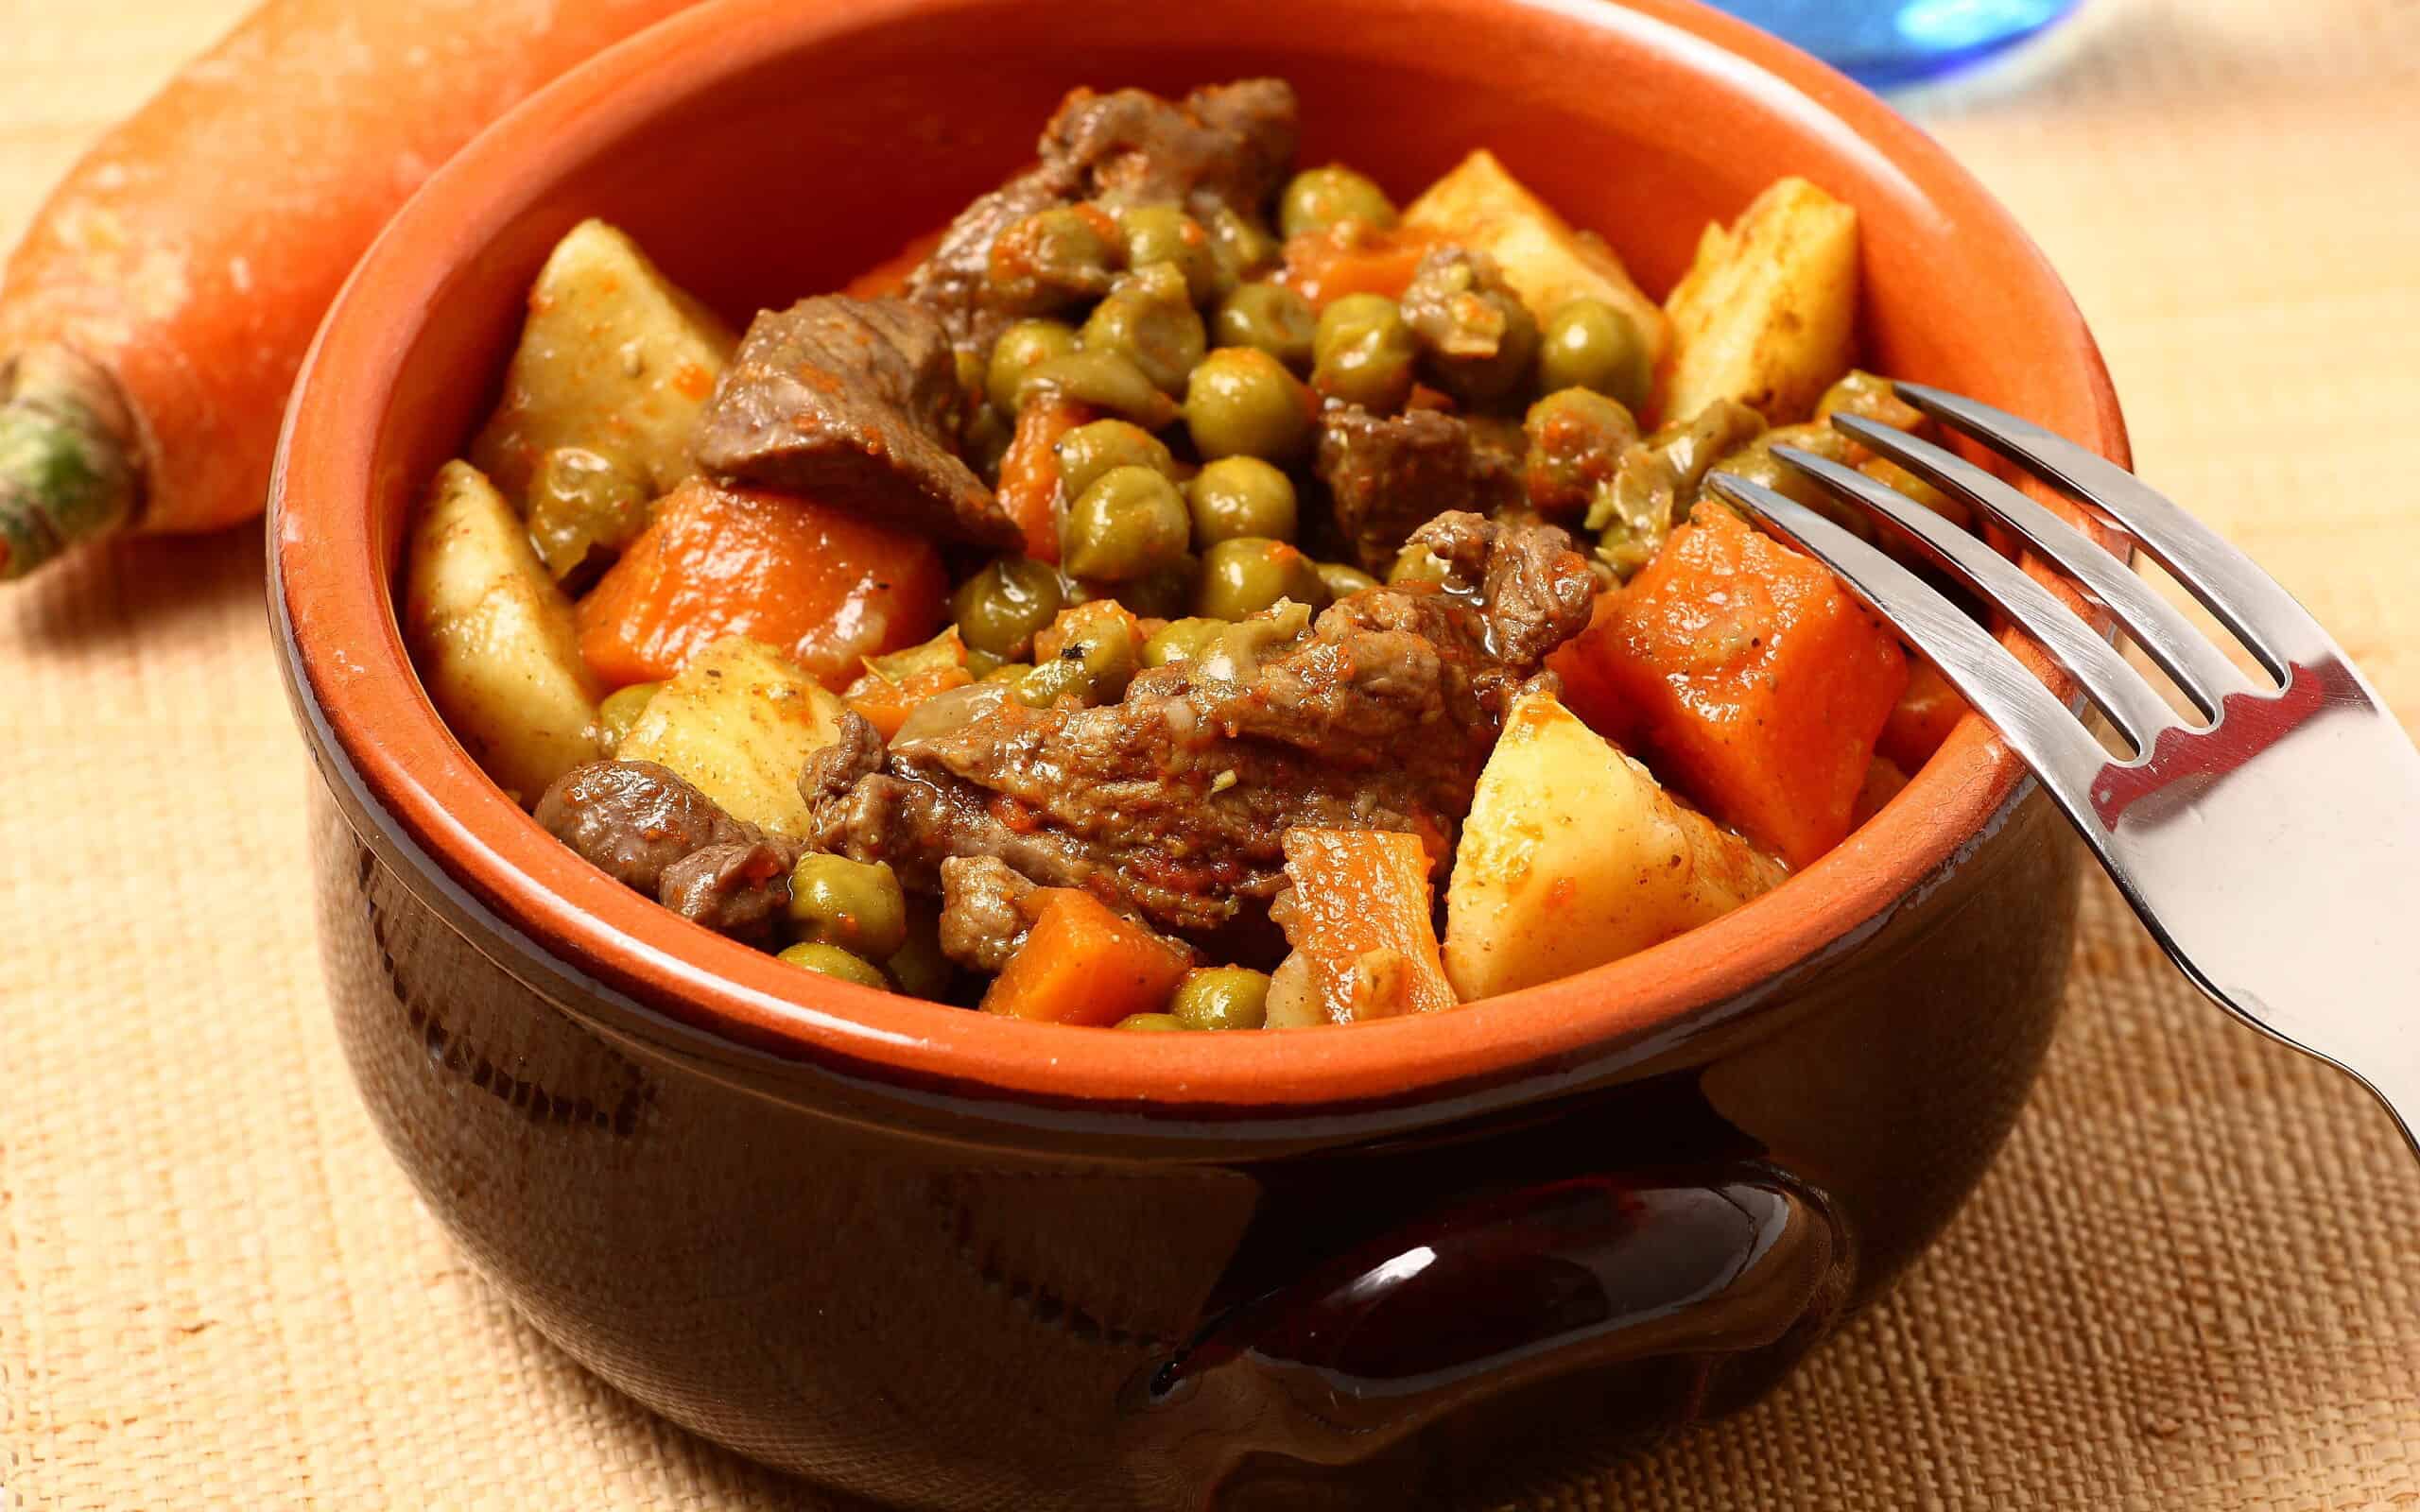 Meat stew